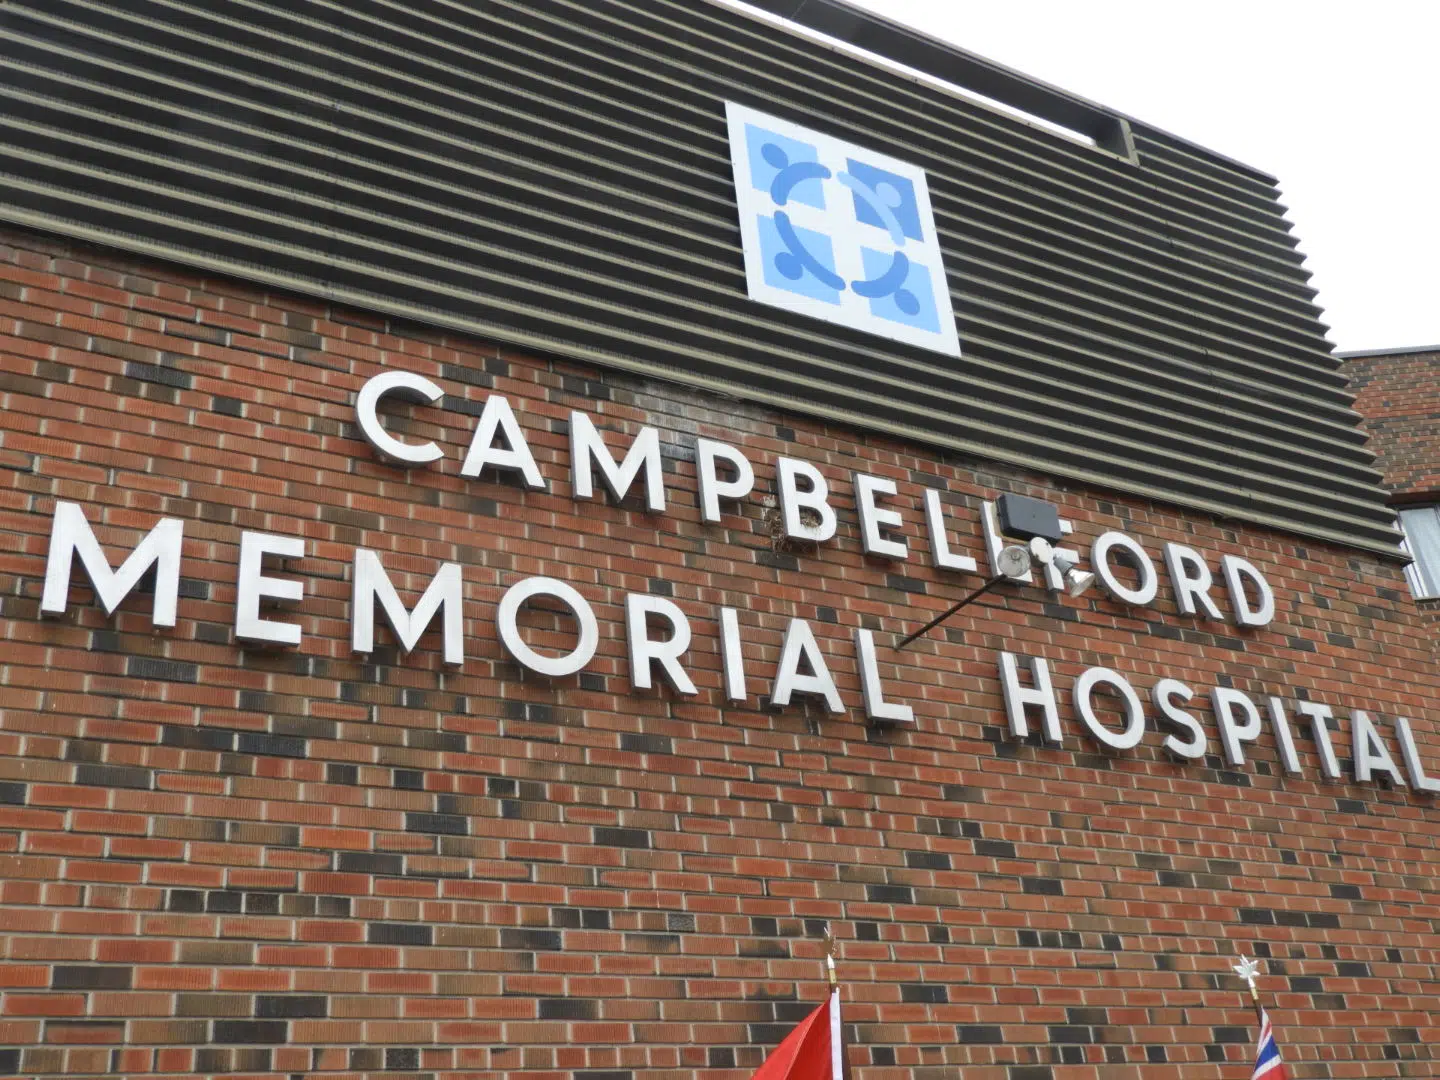 Many procedures to resume soon at Campbellford hospital